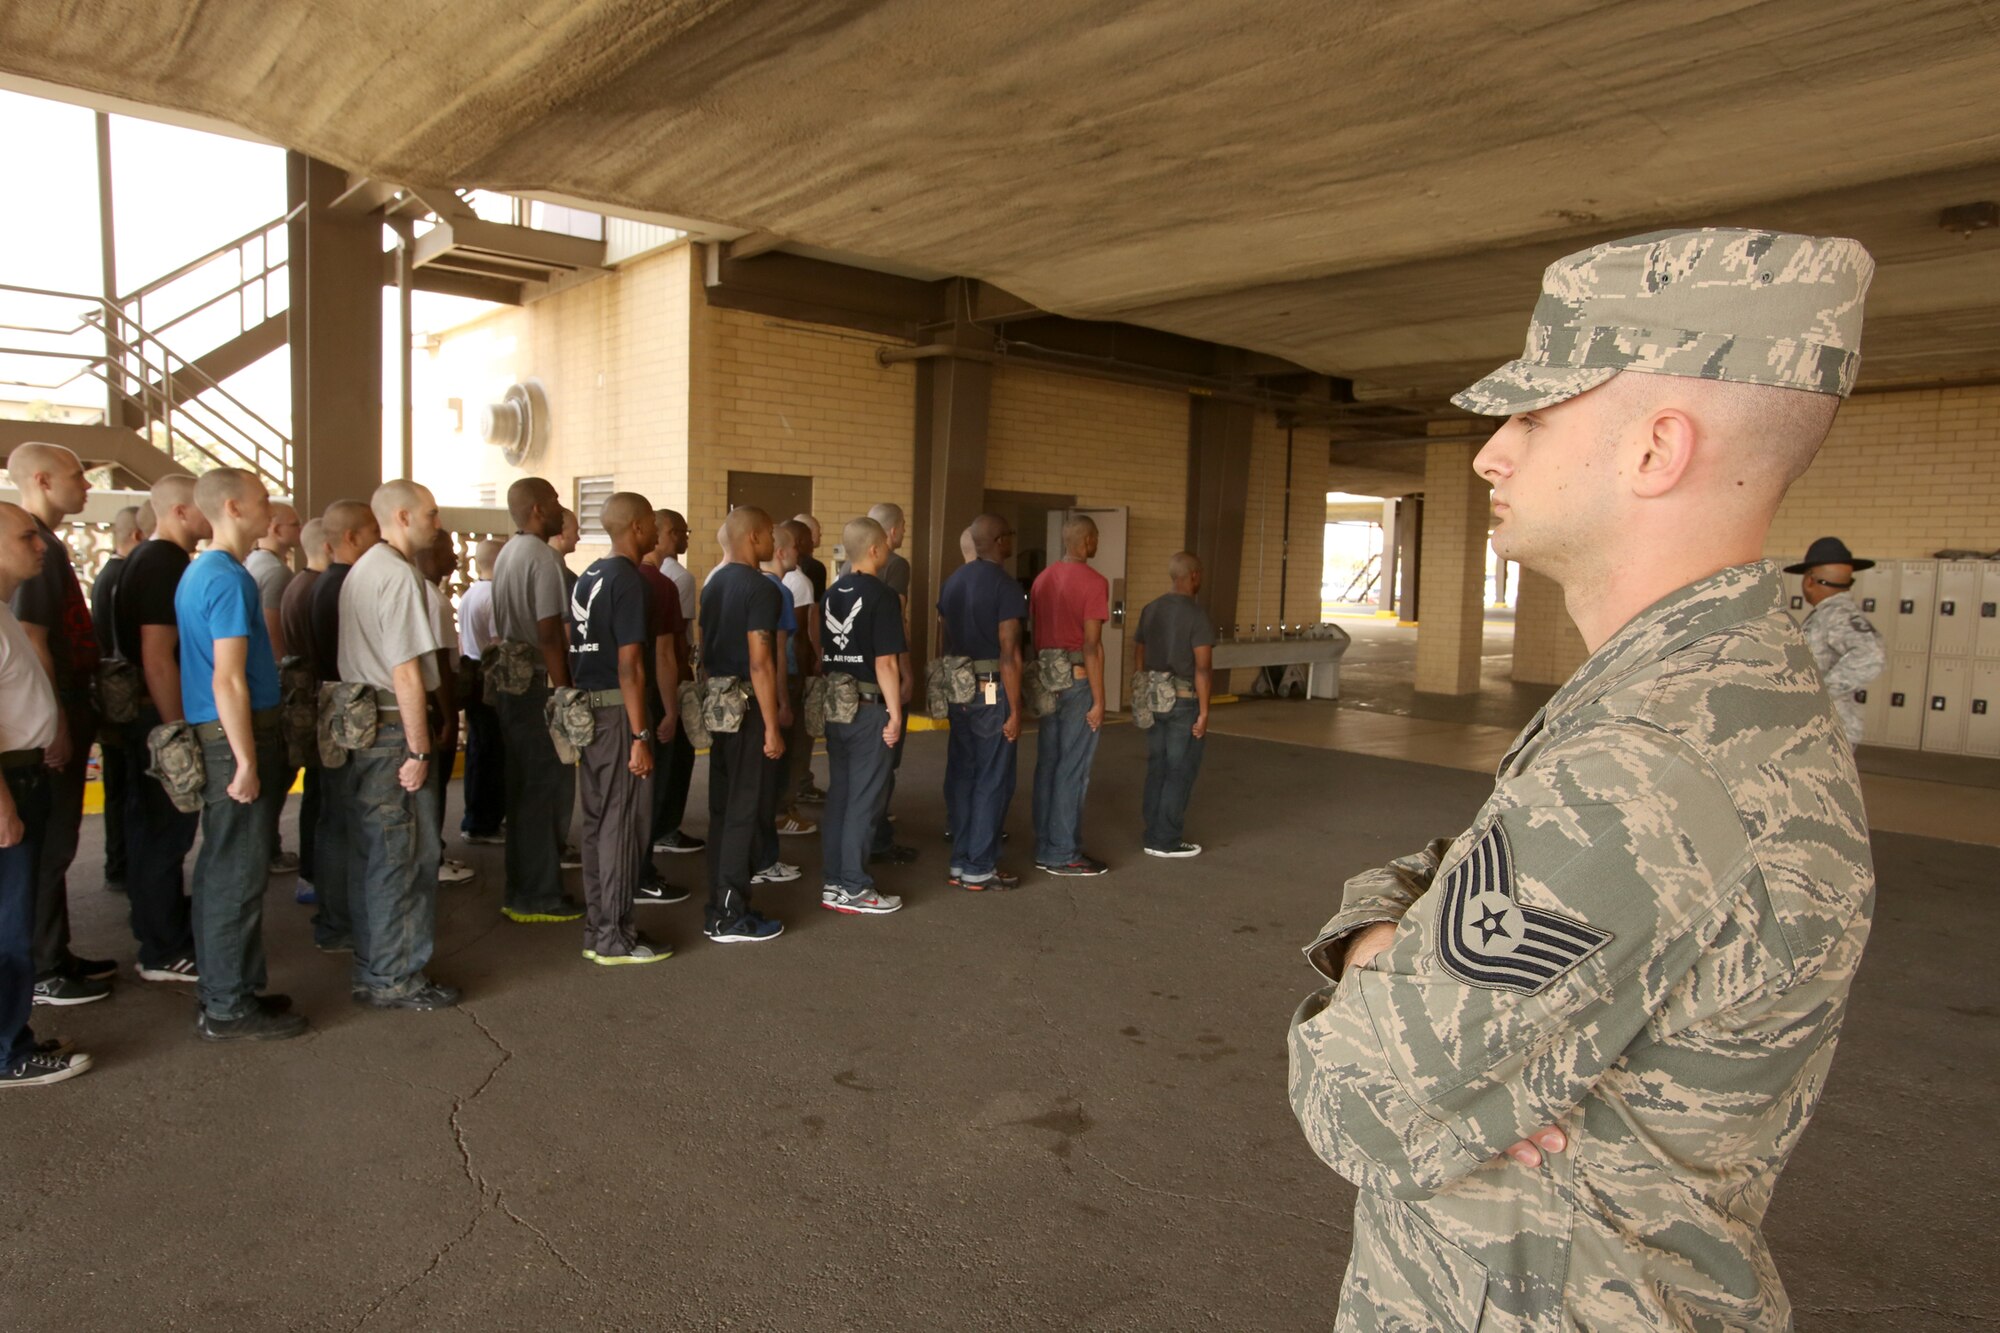 Tech. Sgt. Joshua Sharp observes Air Force basic training at JBSA-Lackland. He shadowed Military Training Instructors for three days, getting a first-hand experience of the program, so that he could decide whether he wants to become an instructor. (U.S. Air Force photo by Robbin Cresswell/Released)